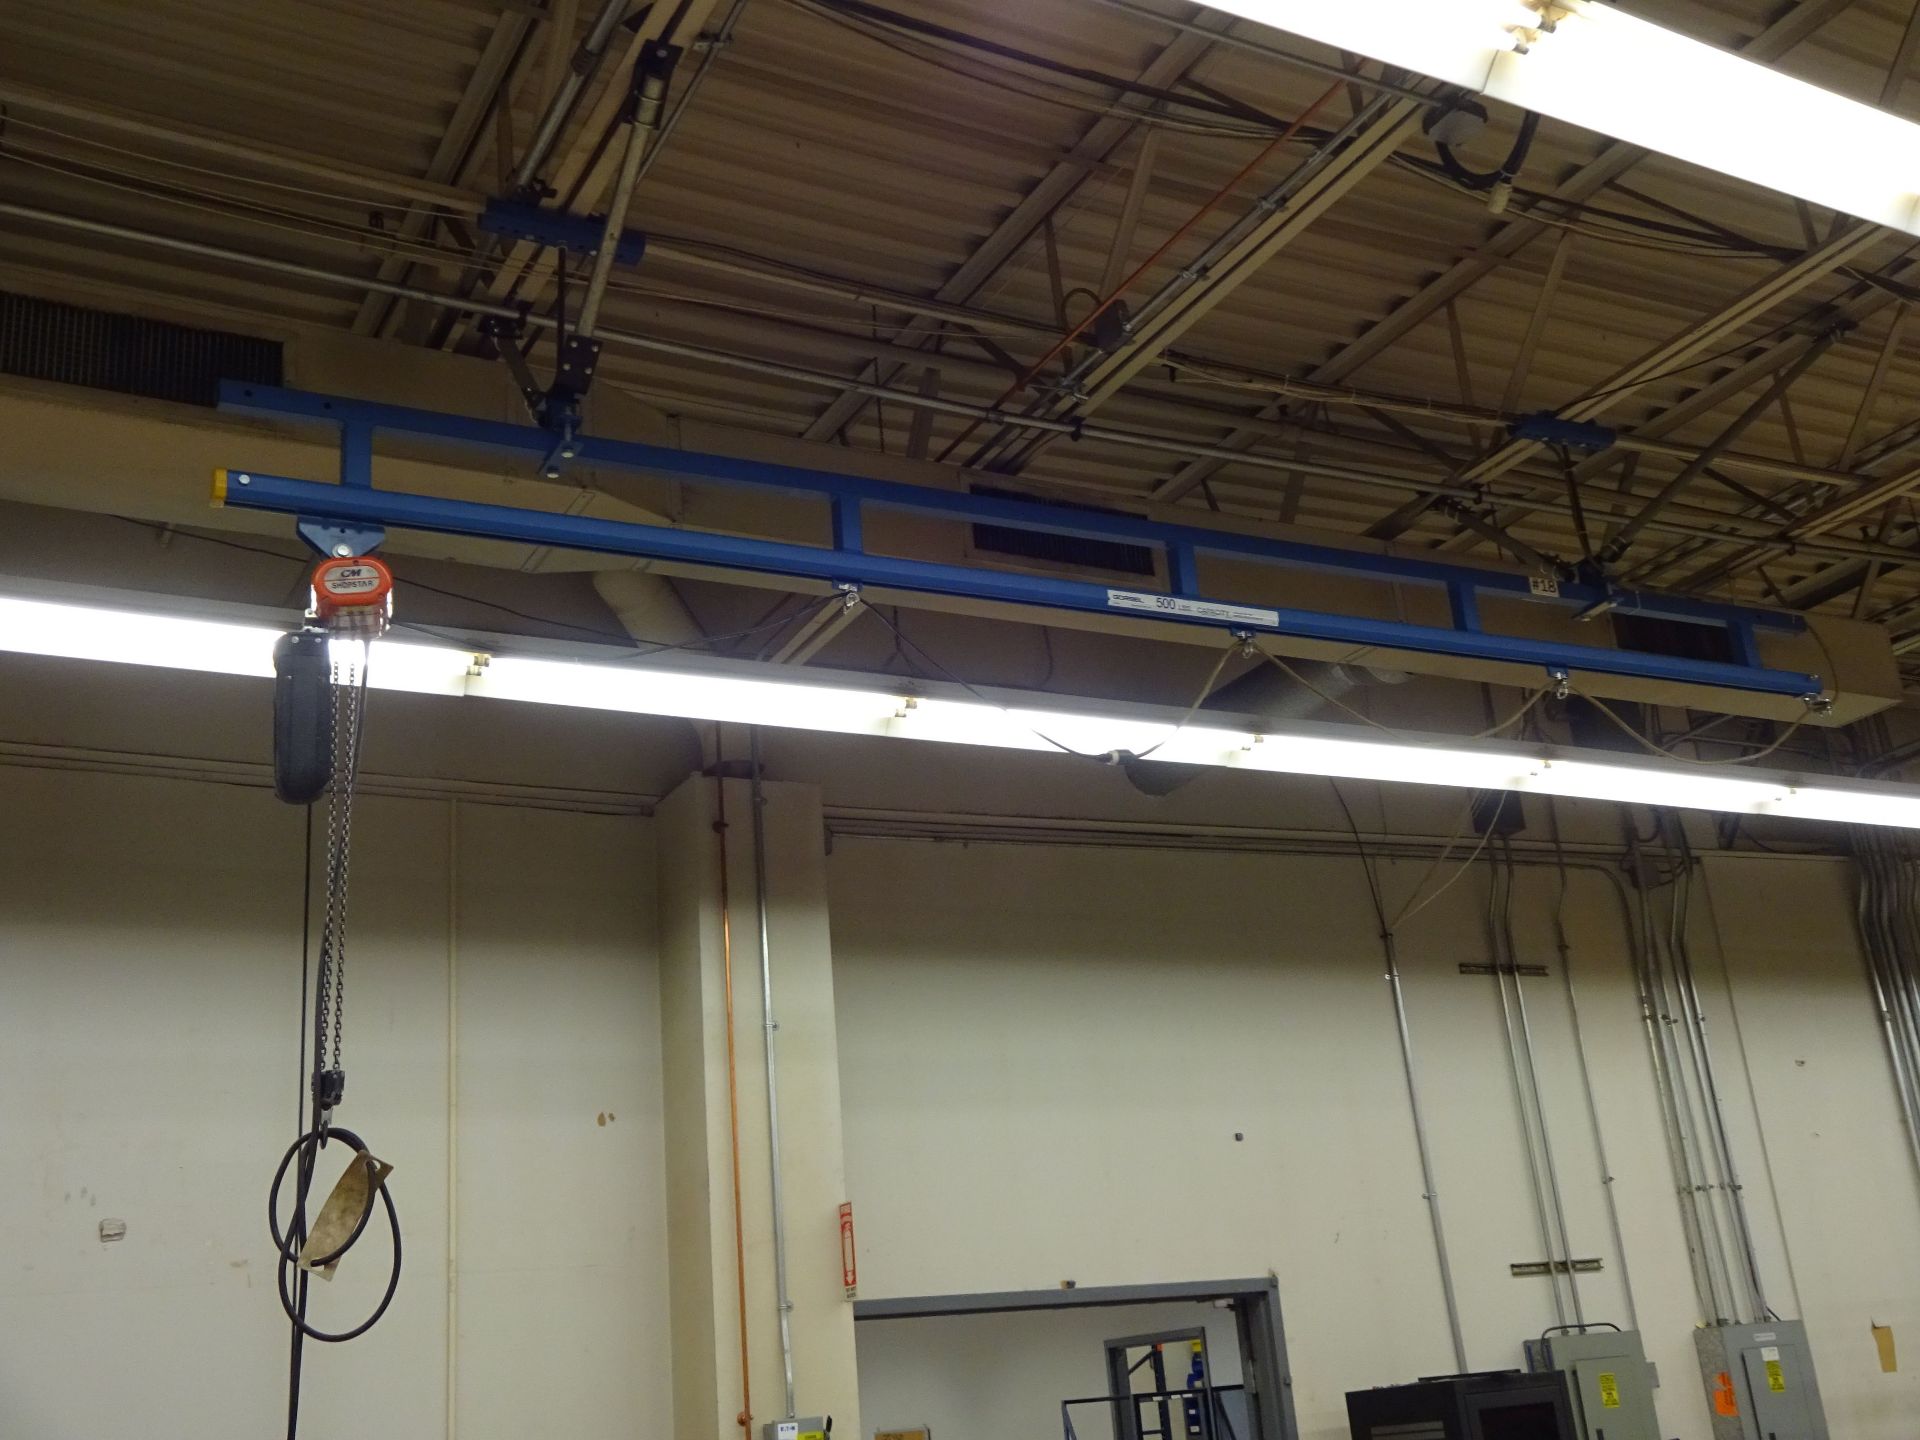 500 LB. X 15' (APPROX.) GORBEL CEILING HUNG OVERHEAD CRANE WITH 500 LB. CM ELECTRIC CHAIN HOIST